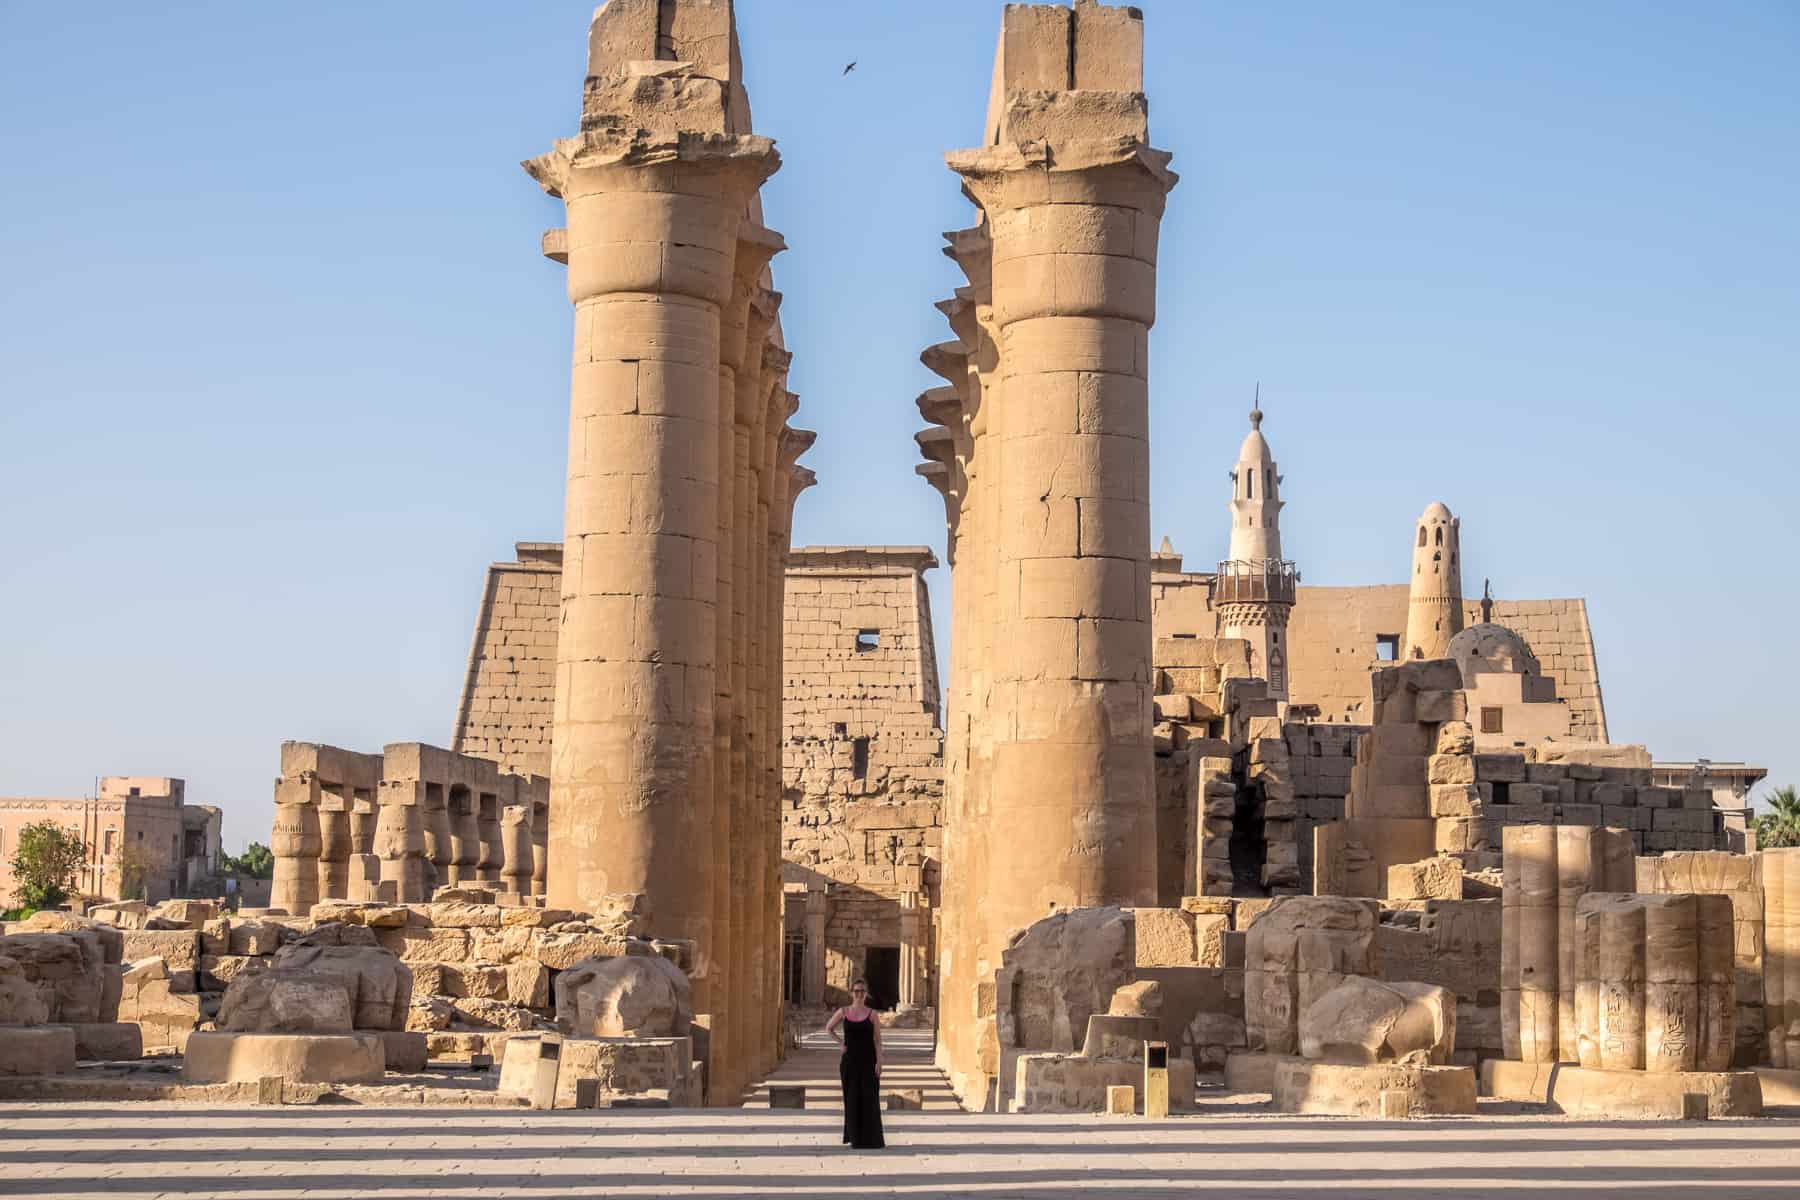 A woman stands in between two towering rows of golden columns of Luxor Temple in Egypt